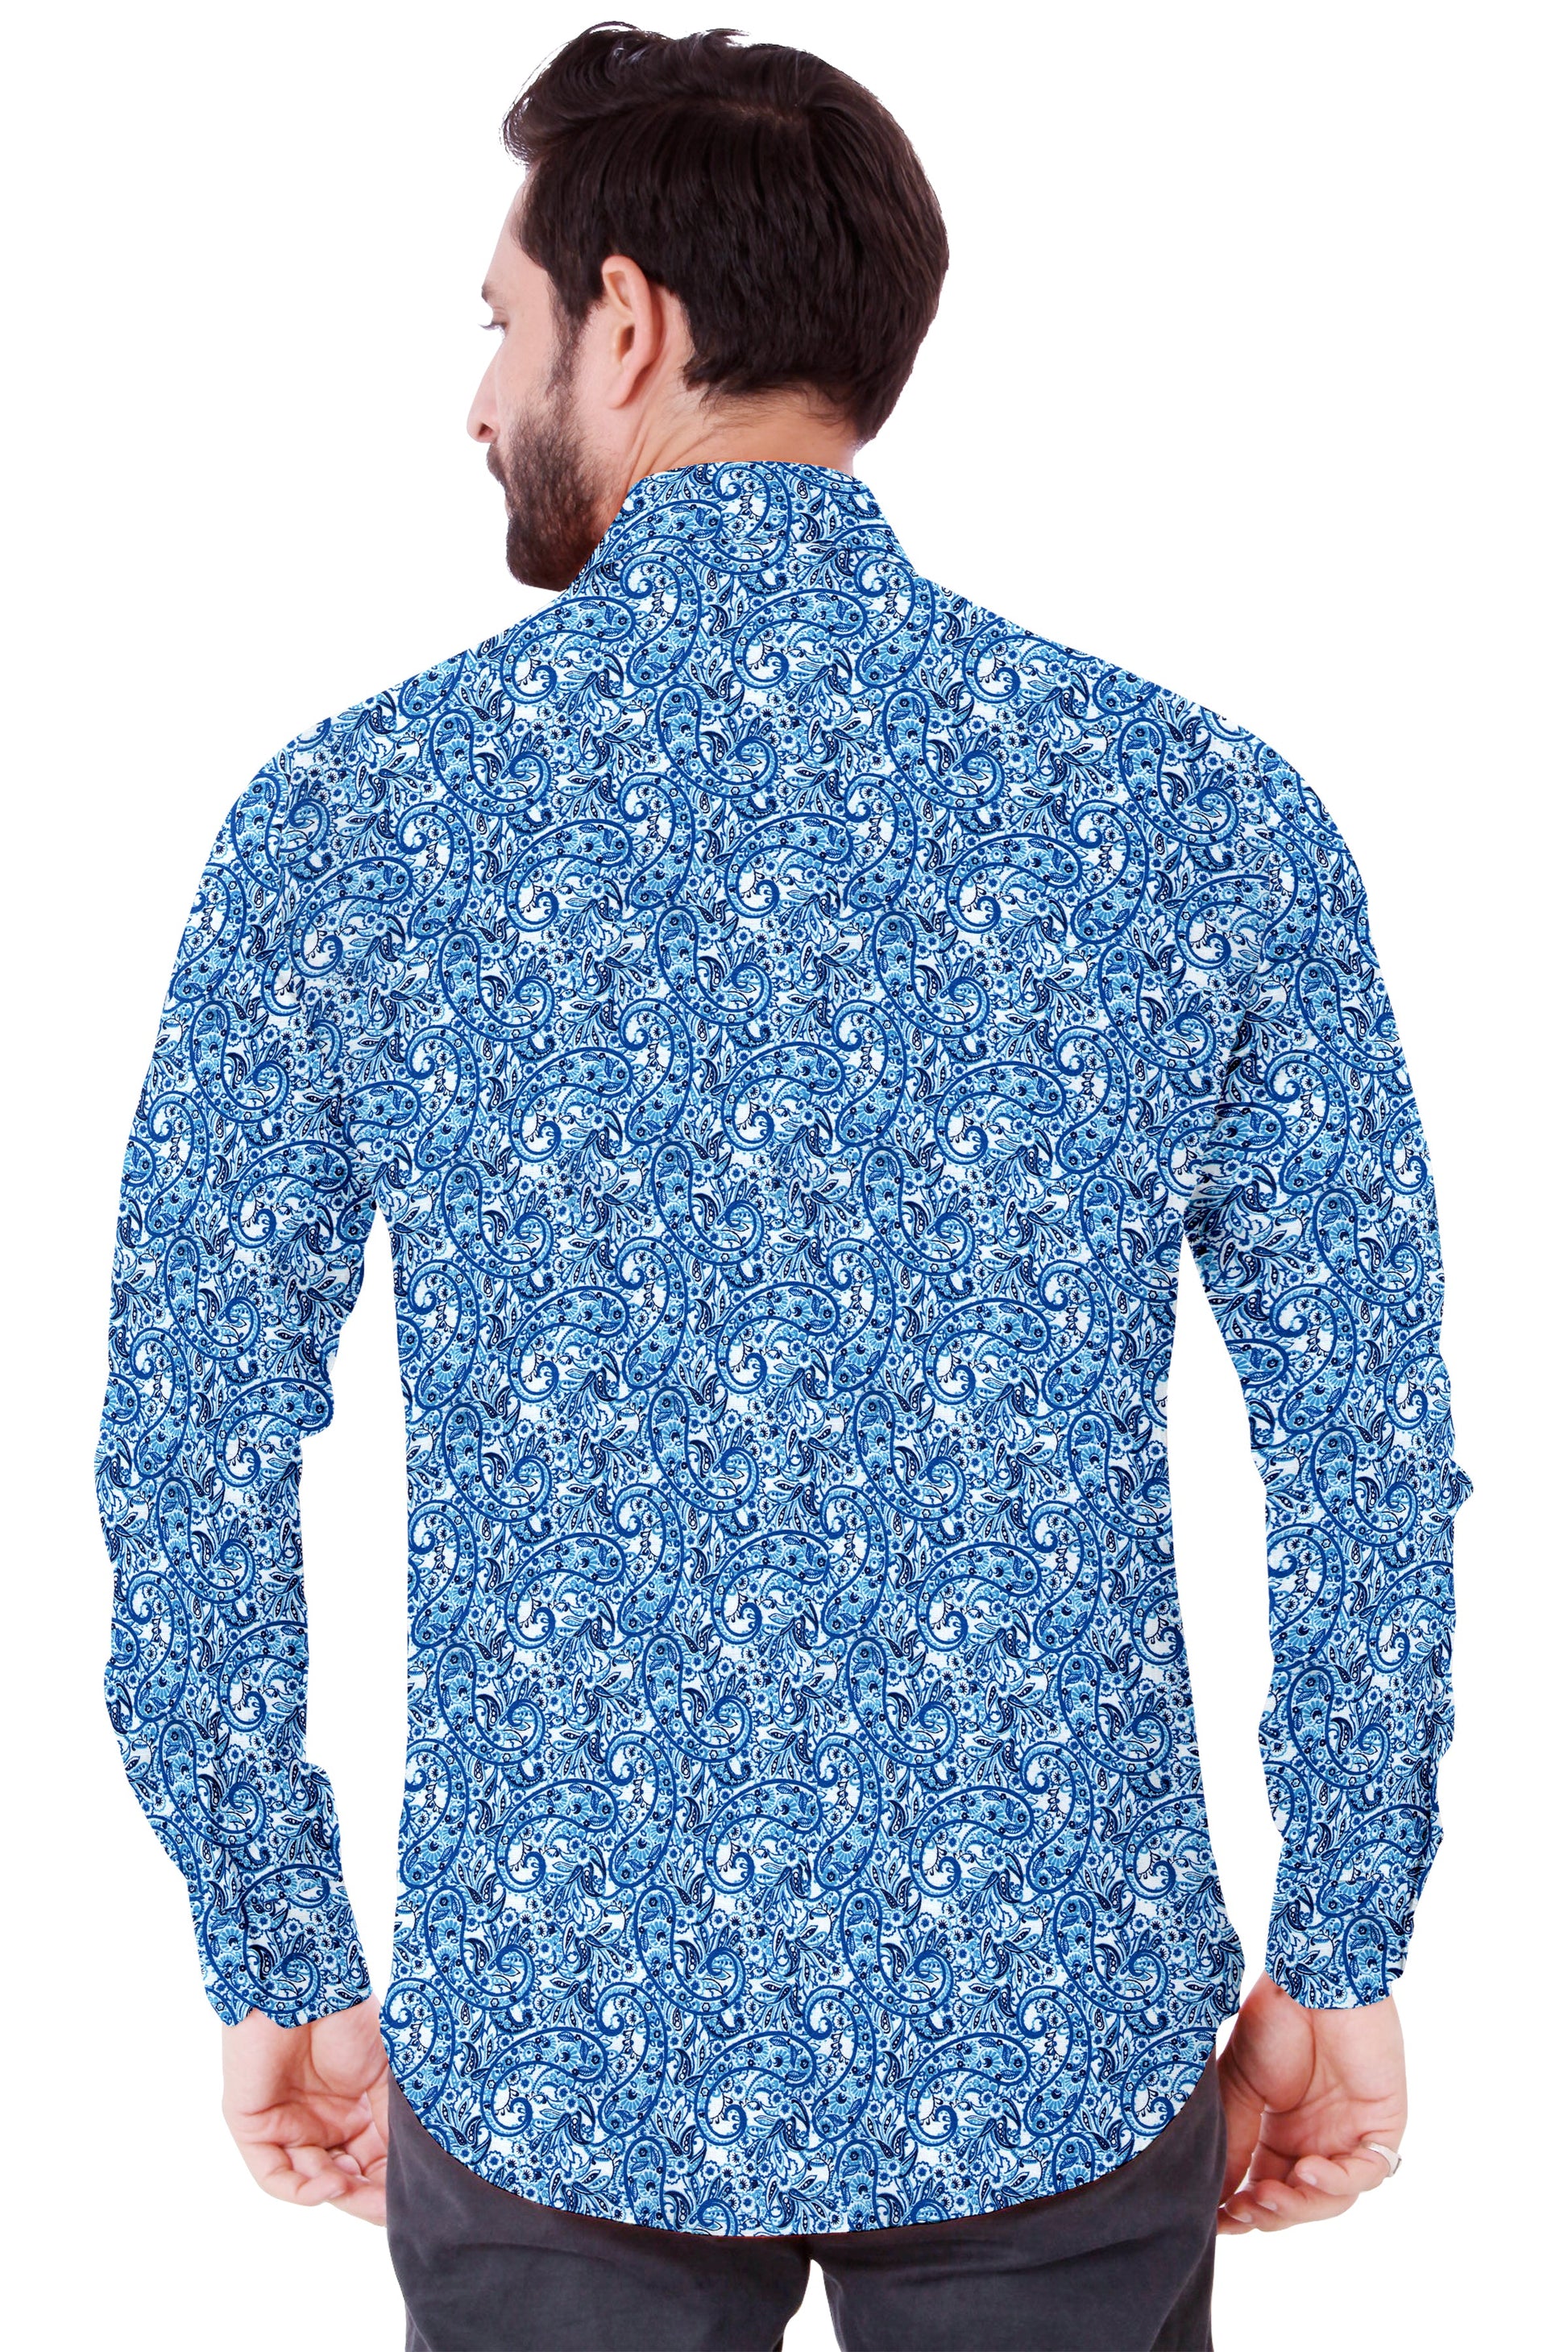 Men's Blue Printed Casual Shirt Full Sleeves 100% Cotton - Styleflea